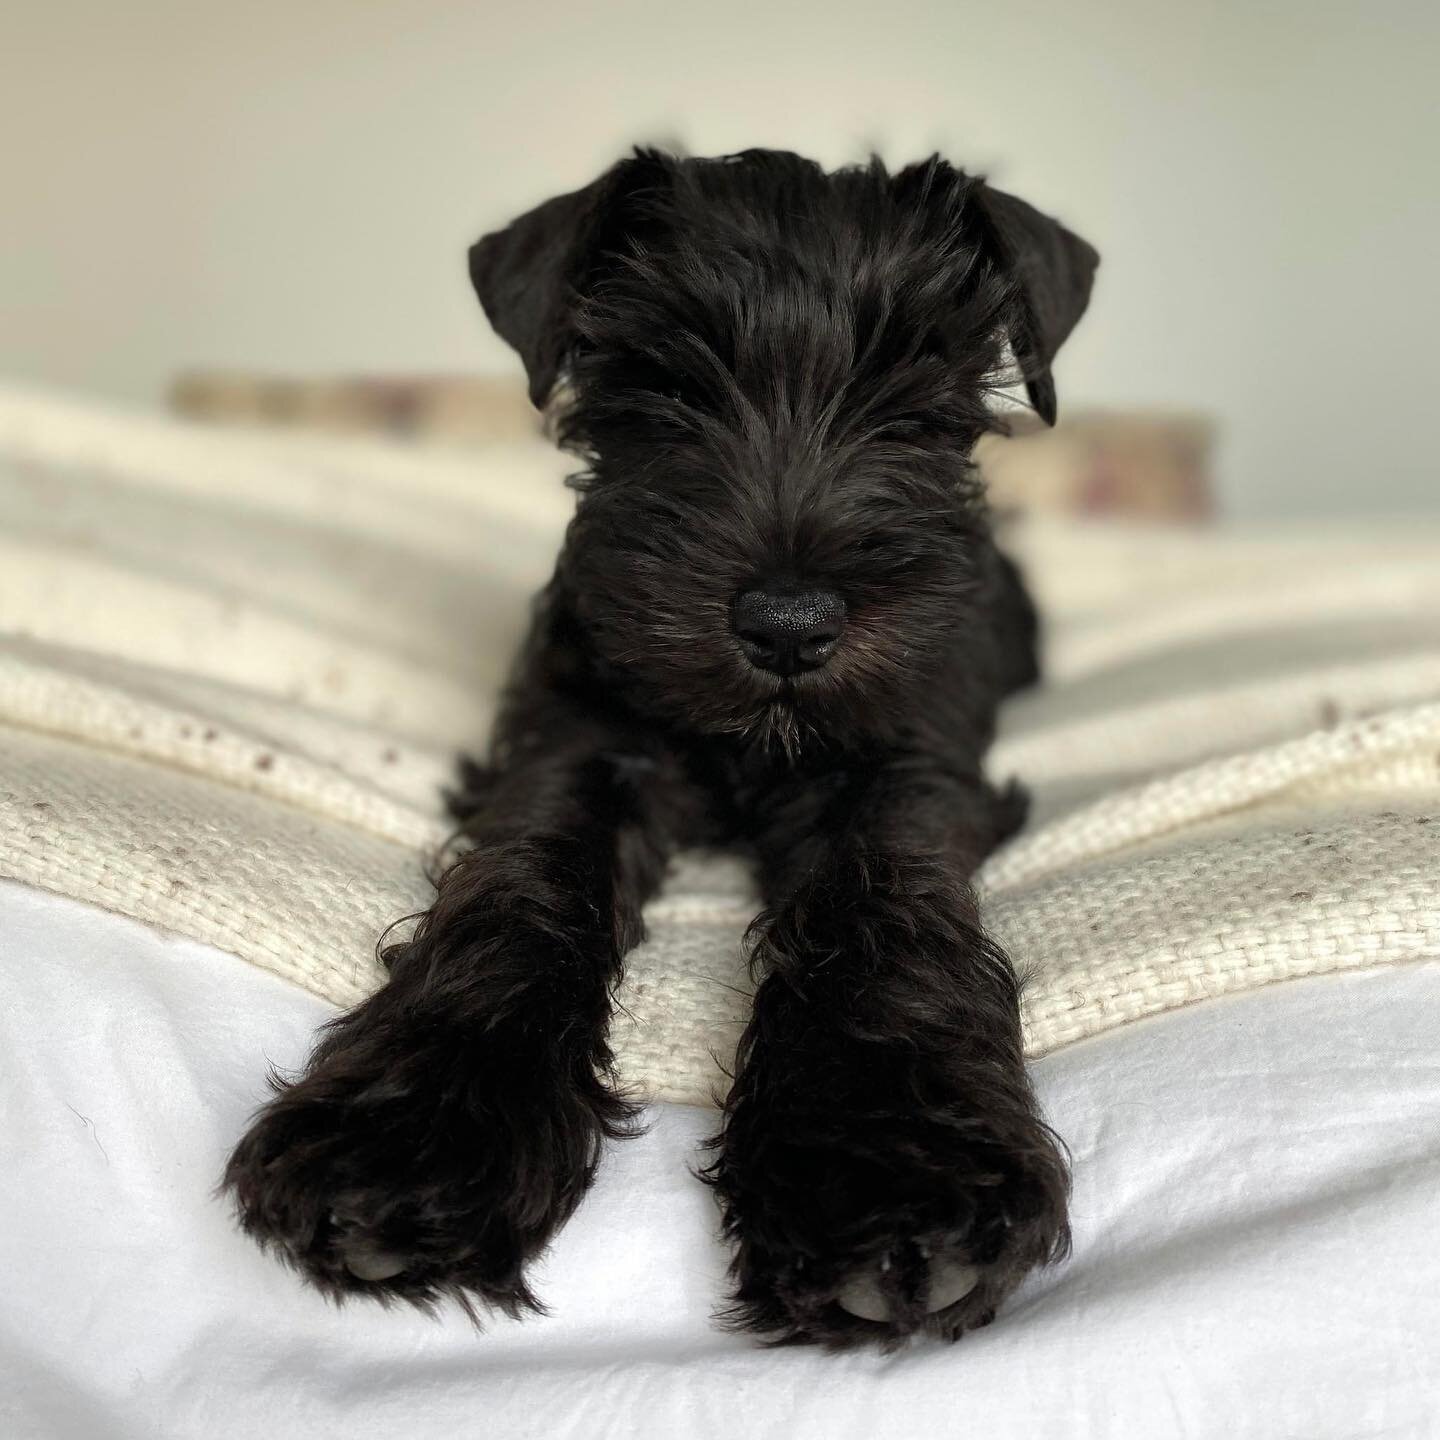 M O T H E R S &bull; D A Y

I am a fur baby Mumma once again. 
Meet Luna. These paws just crush me. ♡ 
Half Miniature Schnauzer, half a looney moonshine.

Luna came as a complete and unplanned Easter surprise. After losing my beautiful Gypsie, I conn